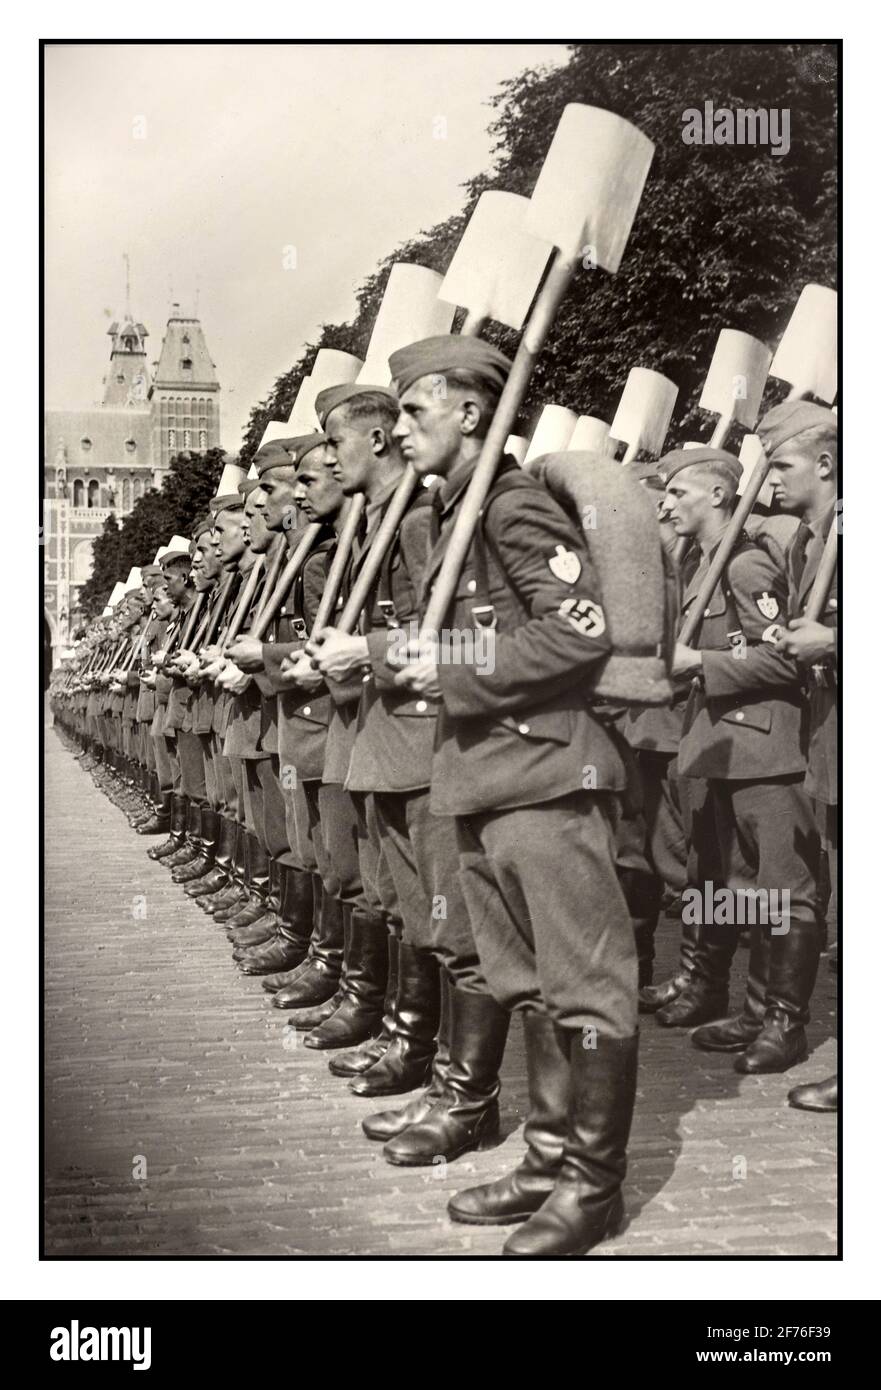 Nazi Germany RAD Parade Reich Labor Work Service Uniform Parade with shovels at attention. Archive 1940s WW2 In front of the Rijksmuseum; the German Reich Labor Service is set up for a parade for Seyss Inquart.; Aug 4; 1940 Amsterdam Holland The Reich Labour Service (Reichsarbeitsdienst; RAD) was a major organisation established in Nazi Germany as an agency to help mitigate the effects of unemployment on the German economy, militarise the workforce and indoctrinate with Nazi ideology. It was the official state labour service, divided into separate sections for men and women. World War II Stock Photo